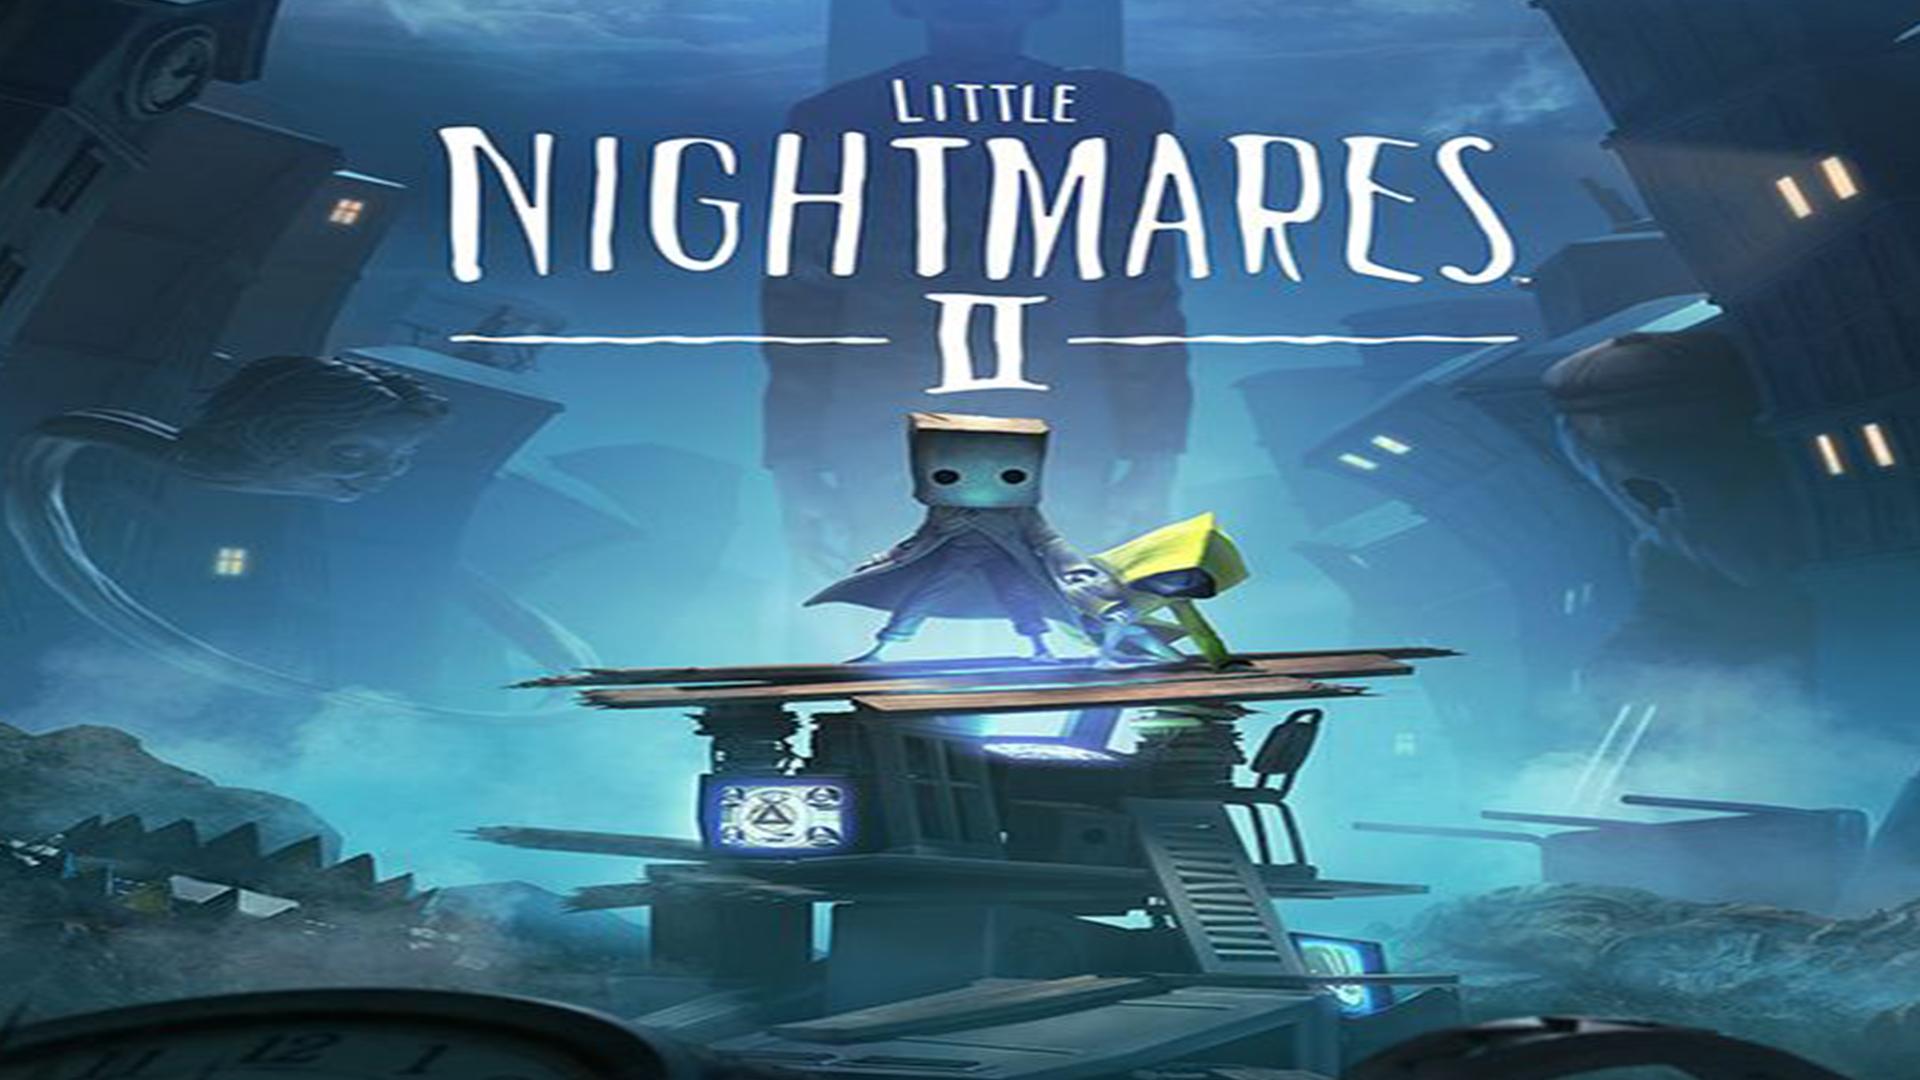 Little nightmares ll android